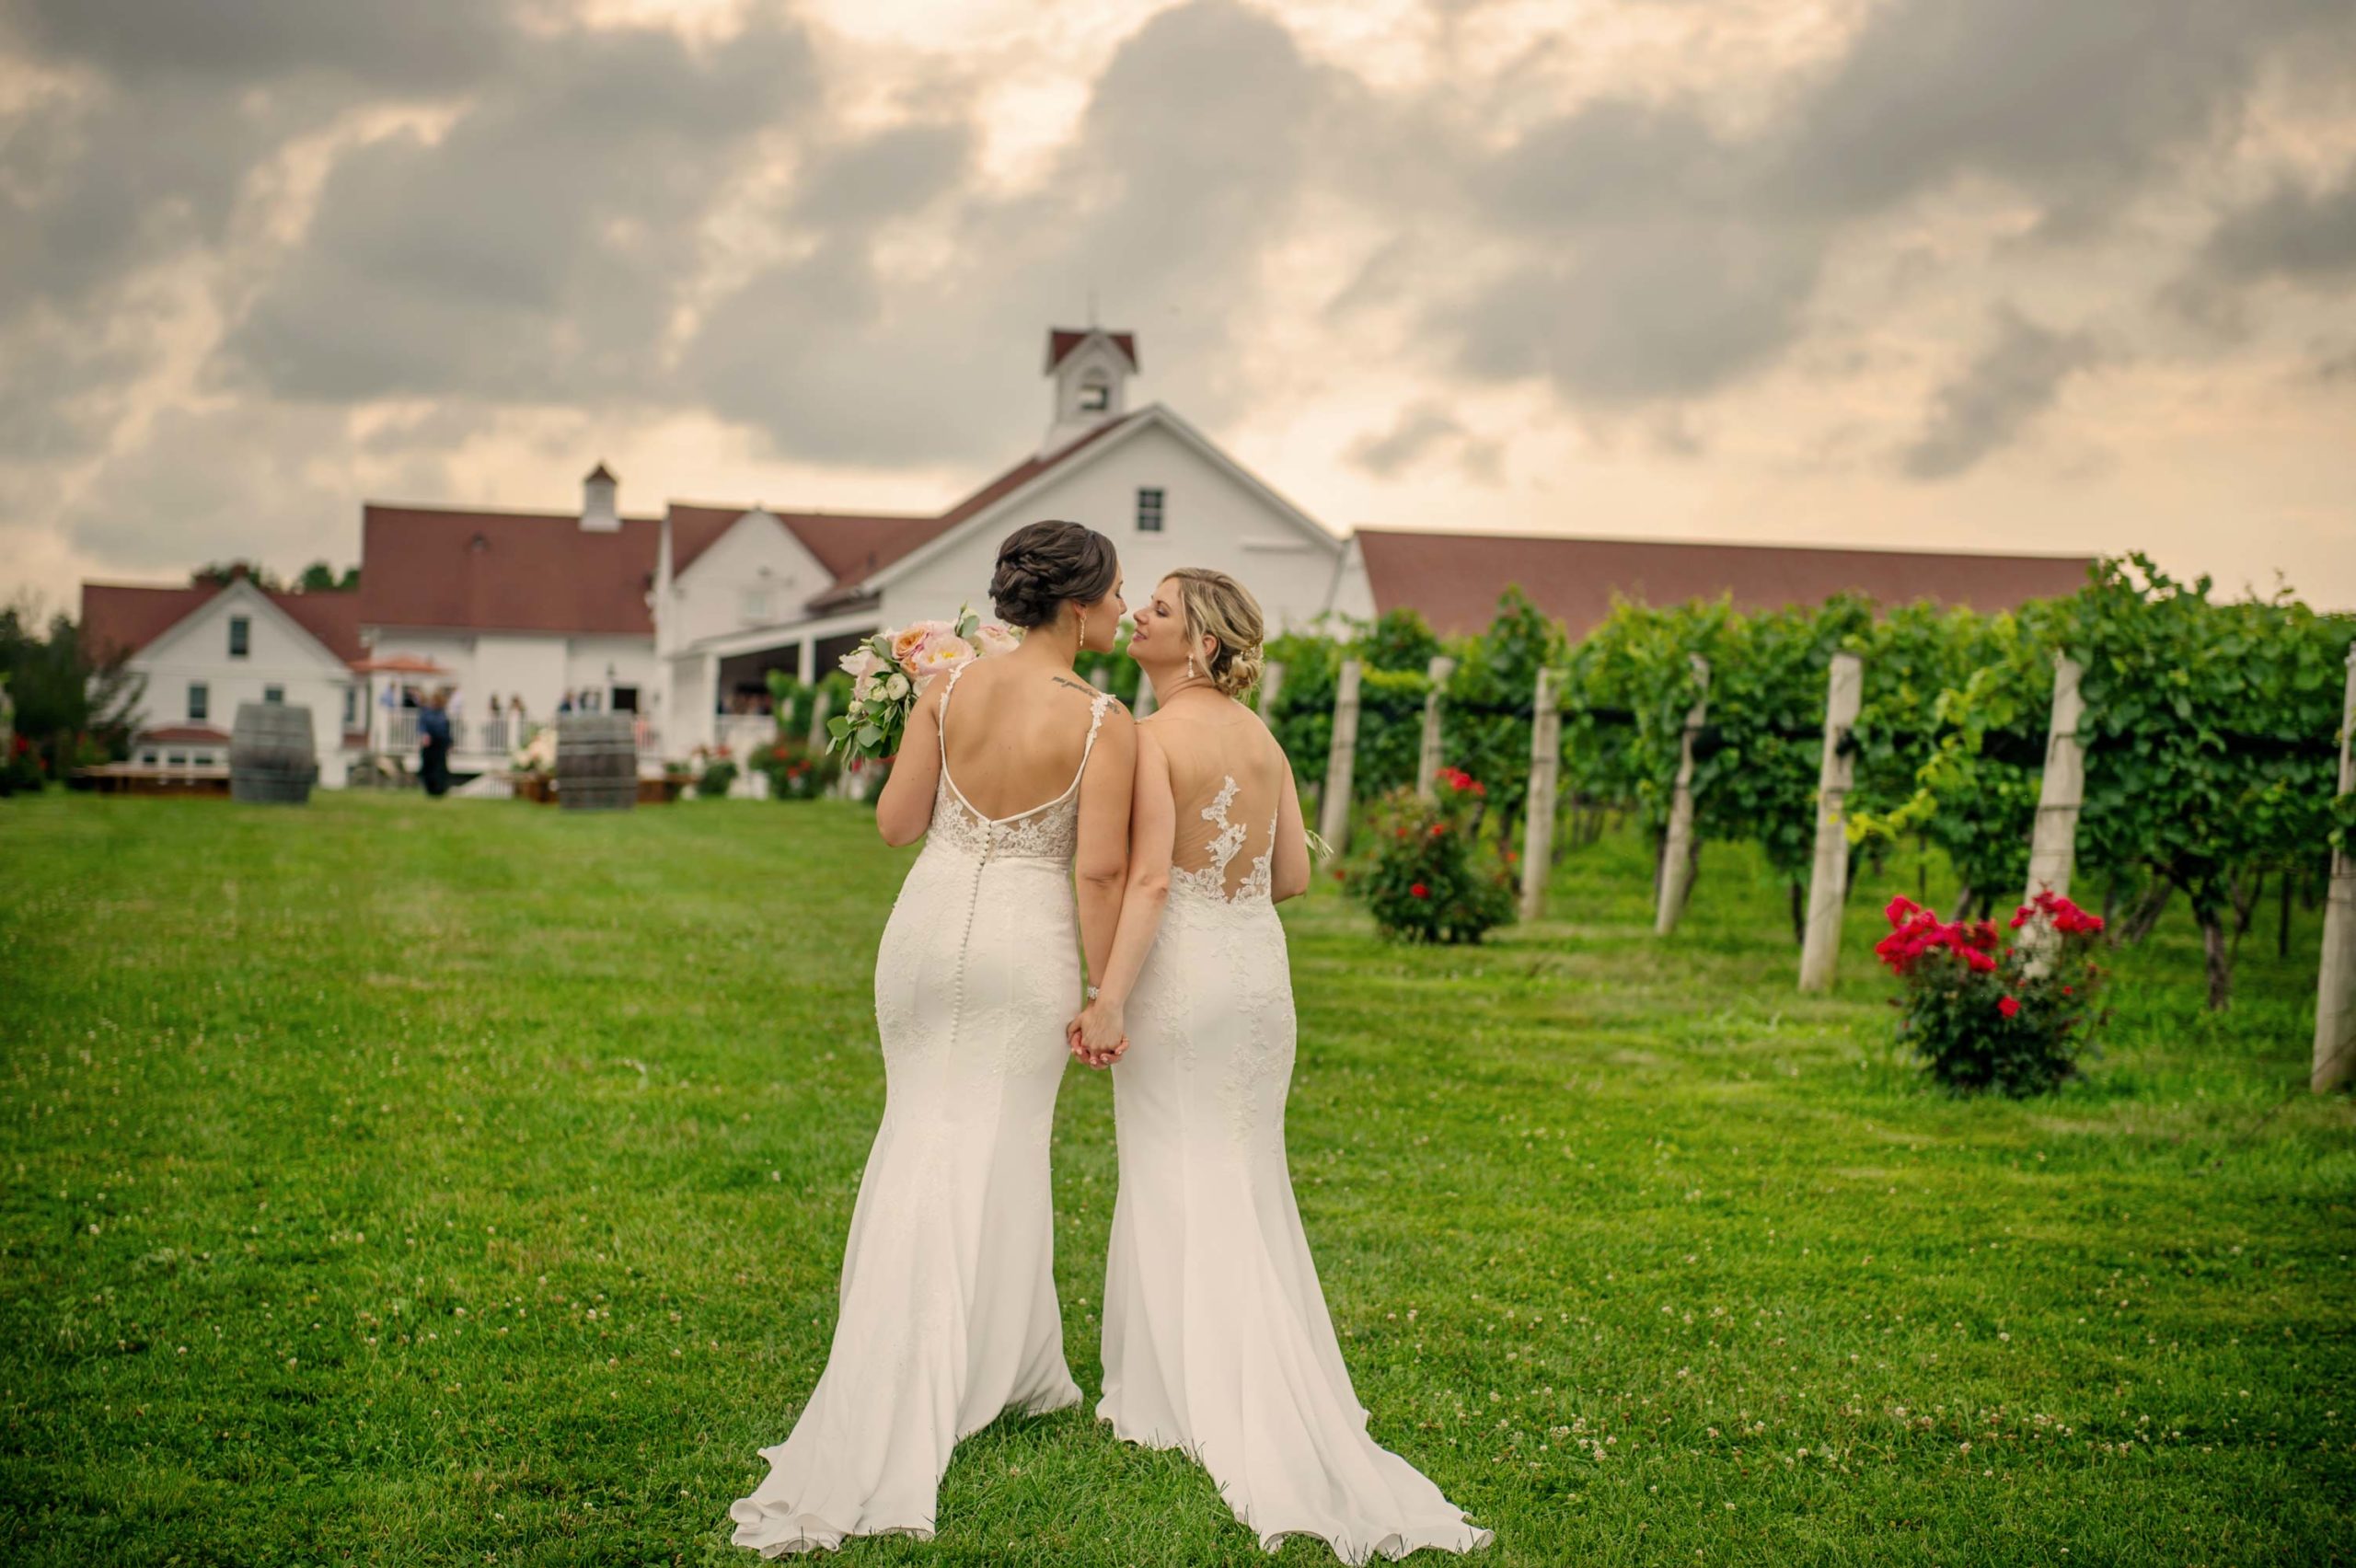 Two brides kiss after their wedding at Jonathan Edwards Winery in North Stonington CT